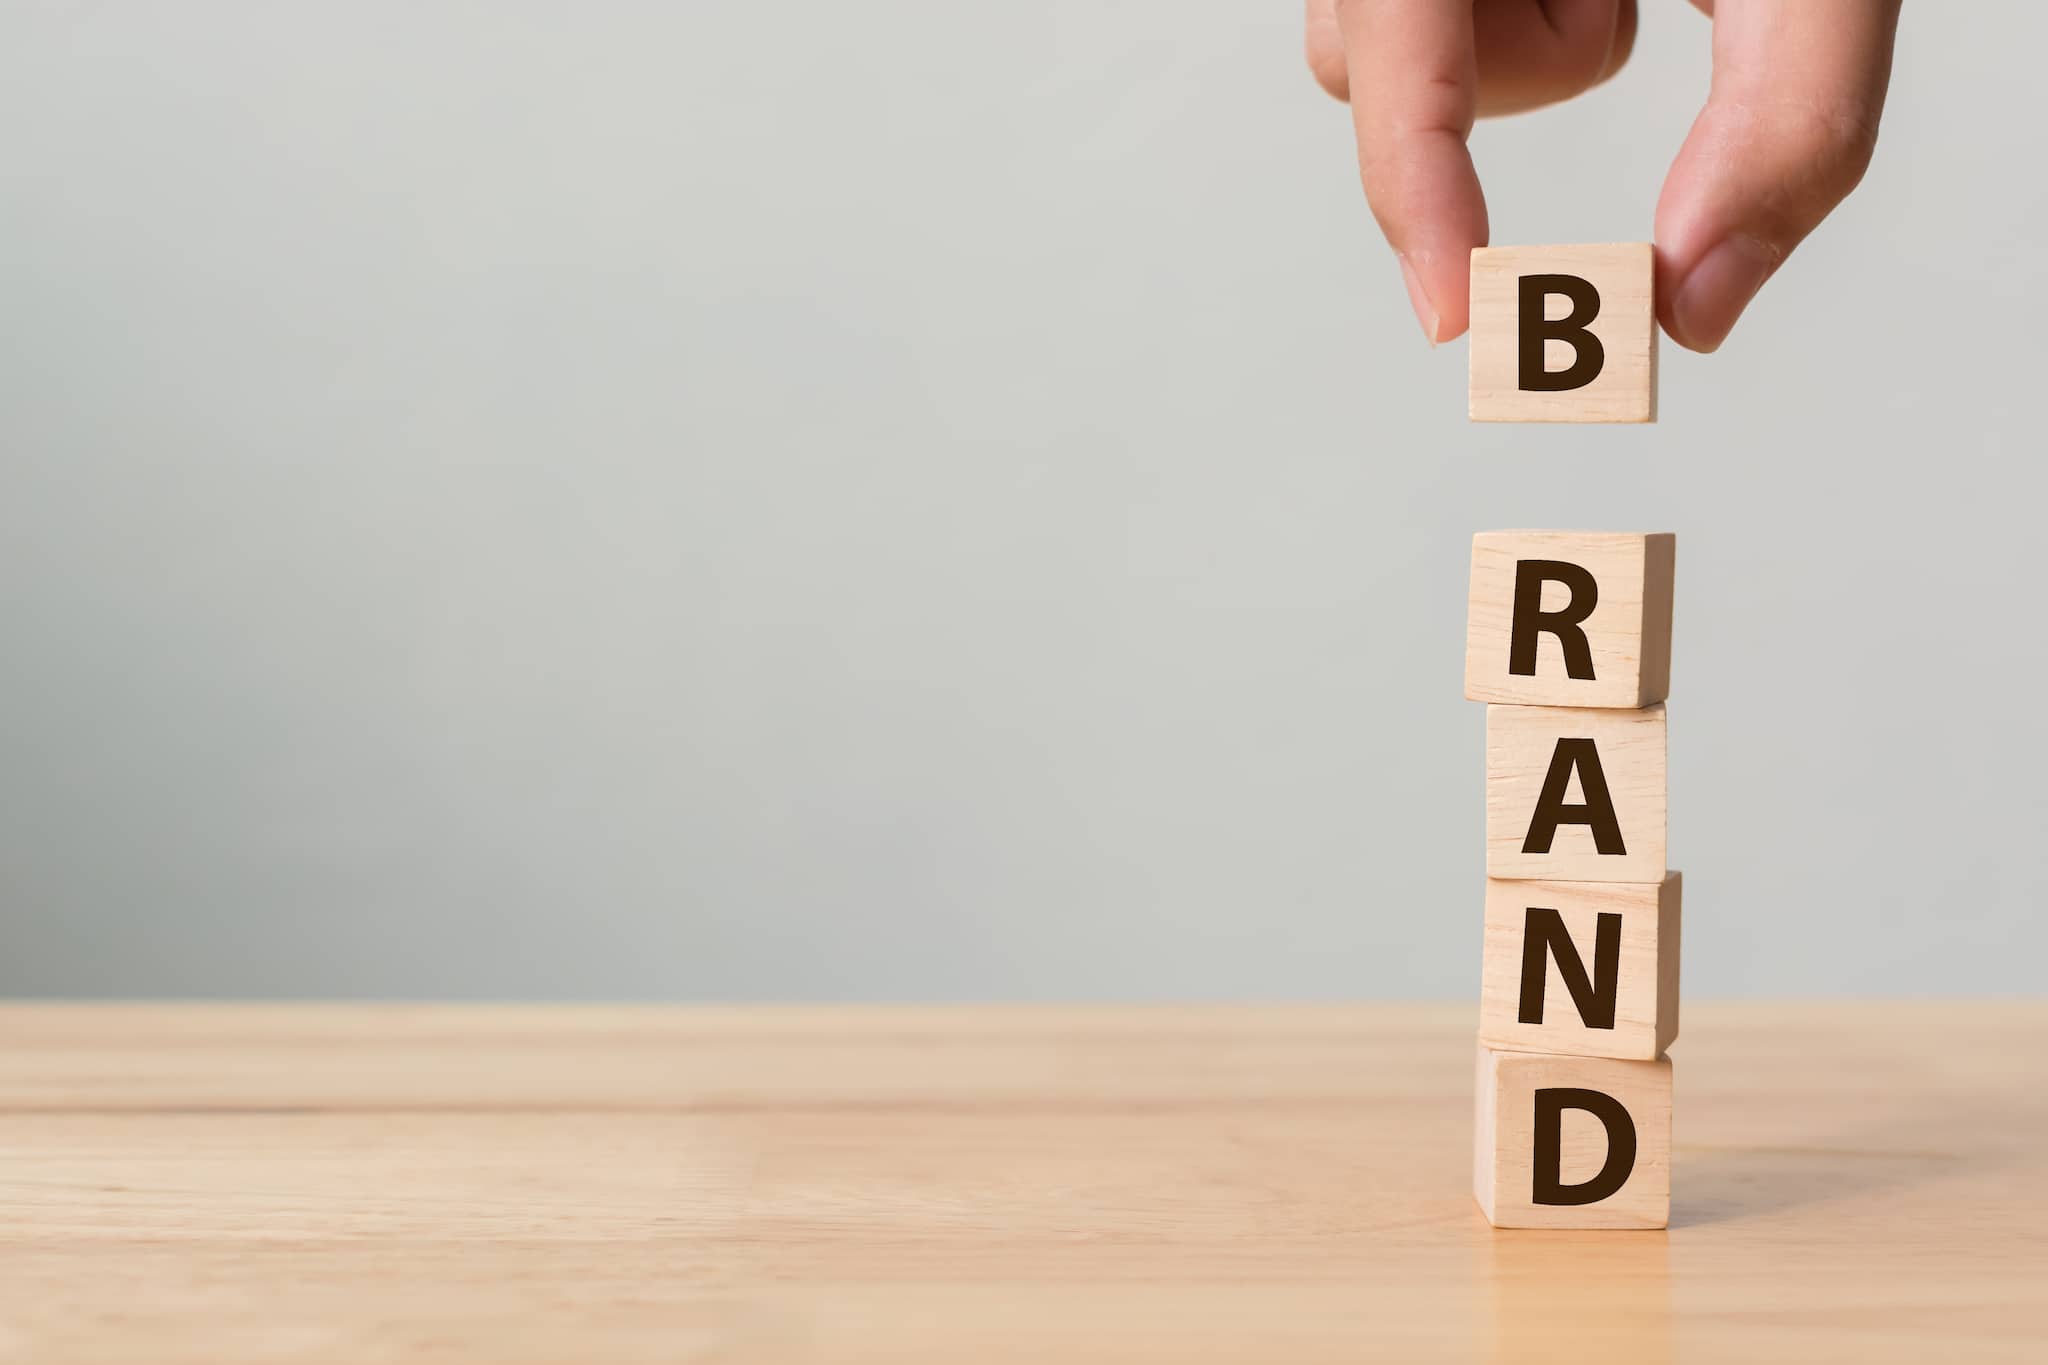 Here's how to deal with a brand crisis